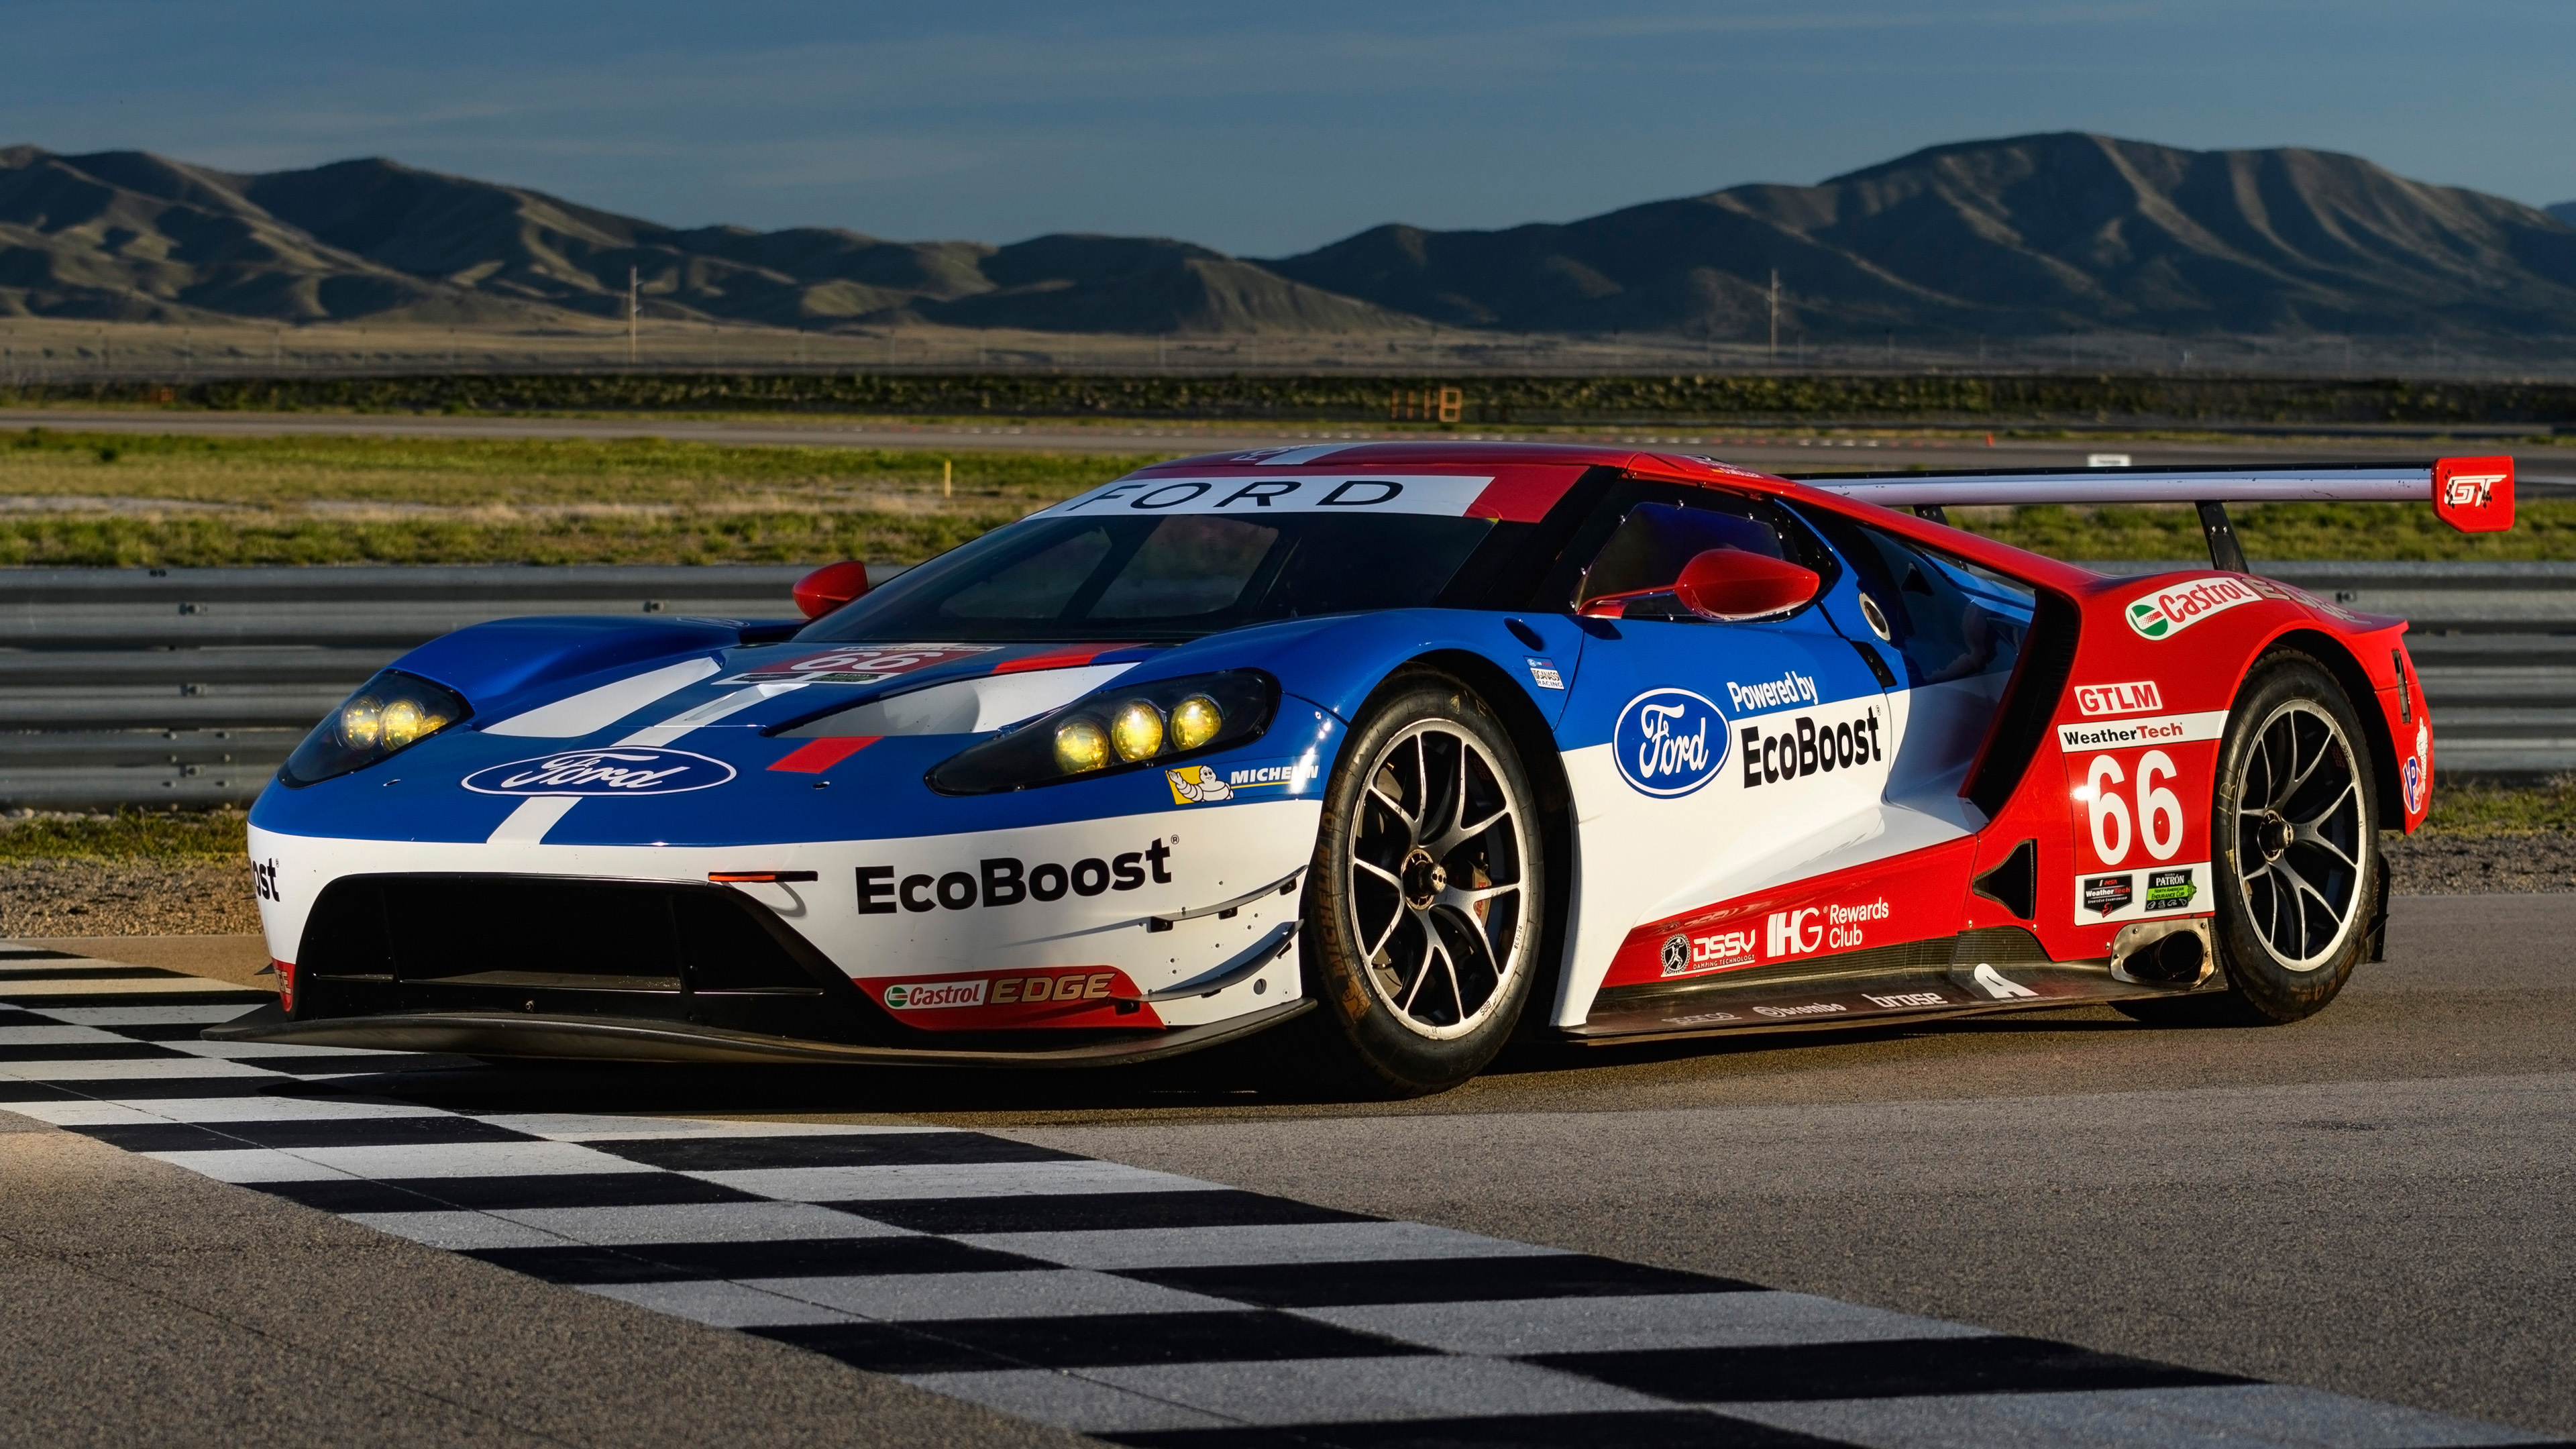 2017 Ford Gt Ecoboost 4k Wallpaper Hd Car Wallpapers Id 8005